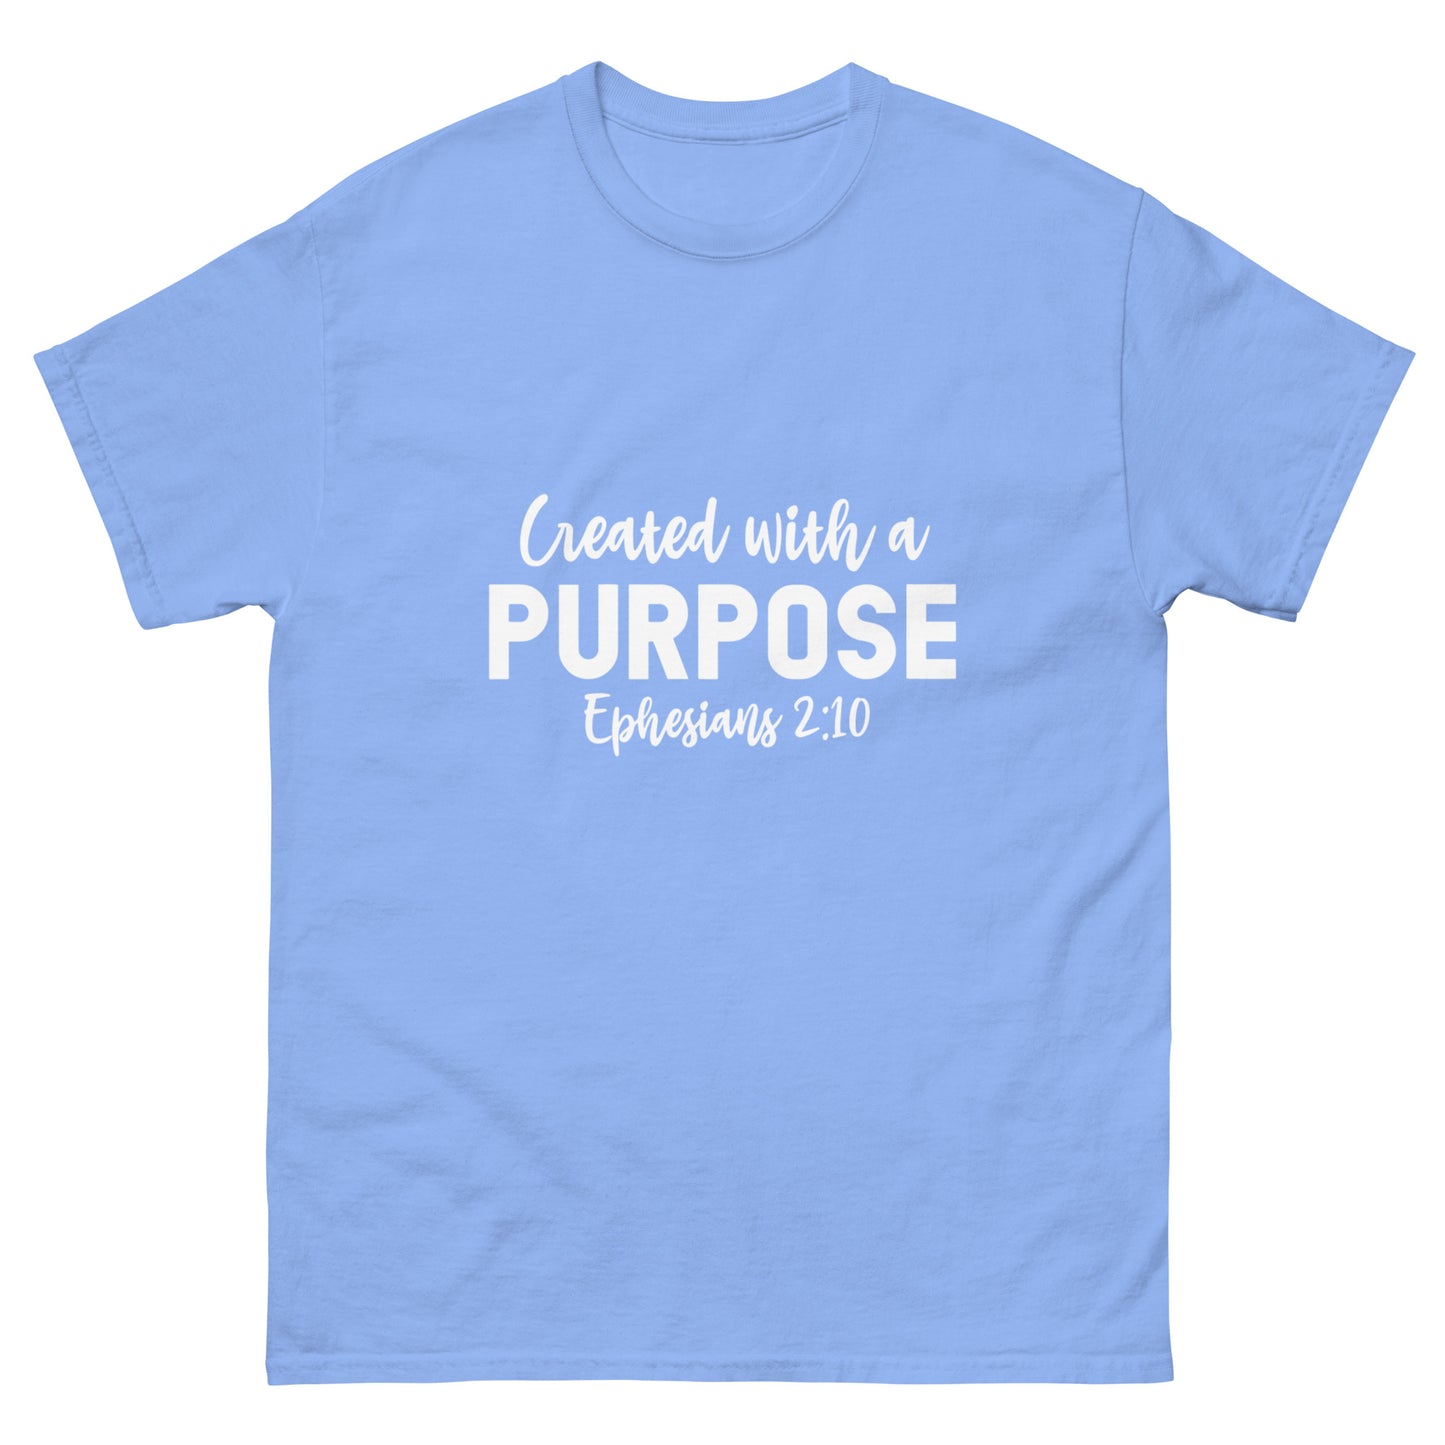 Created with a Purpose - classic tee